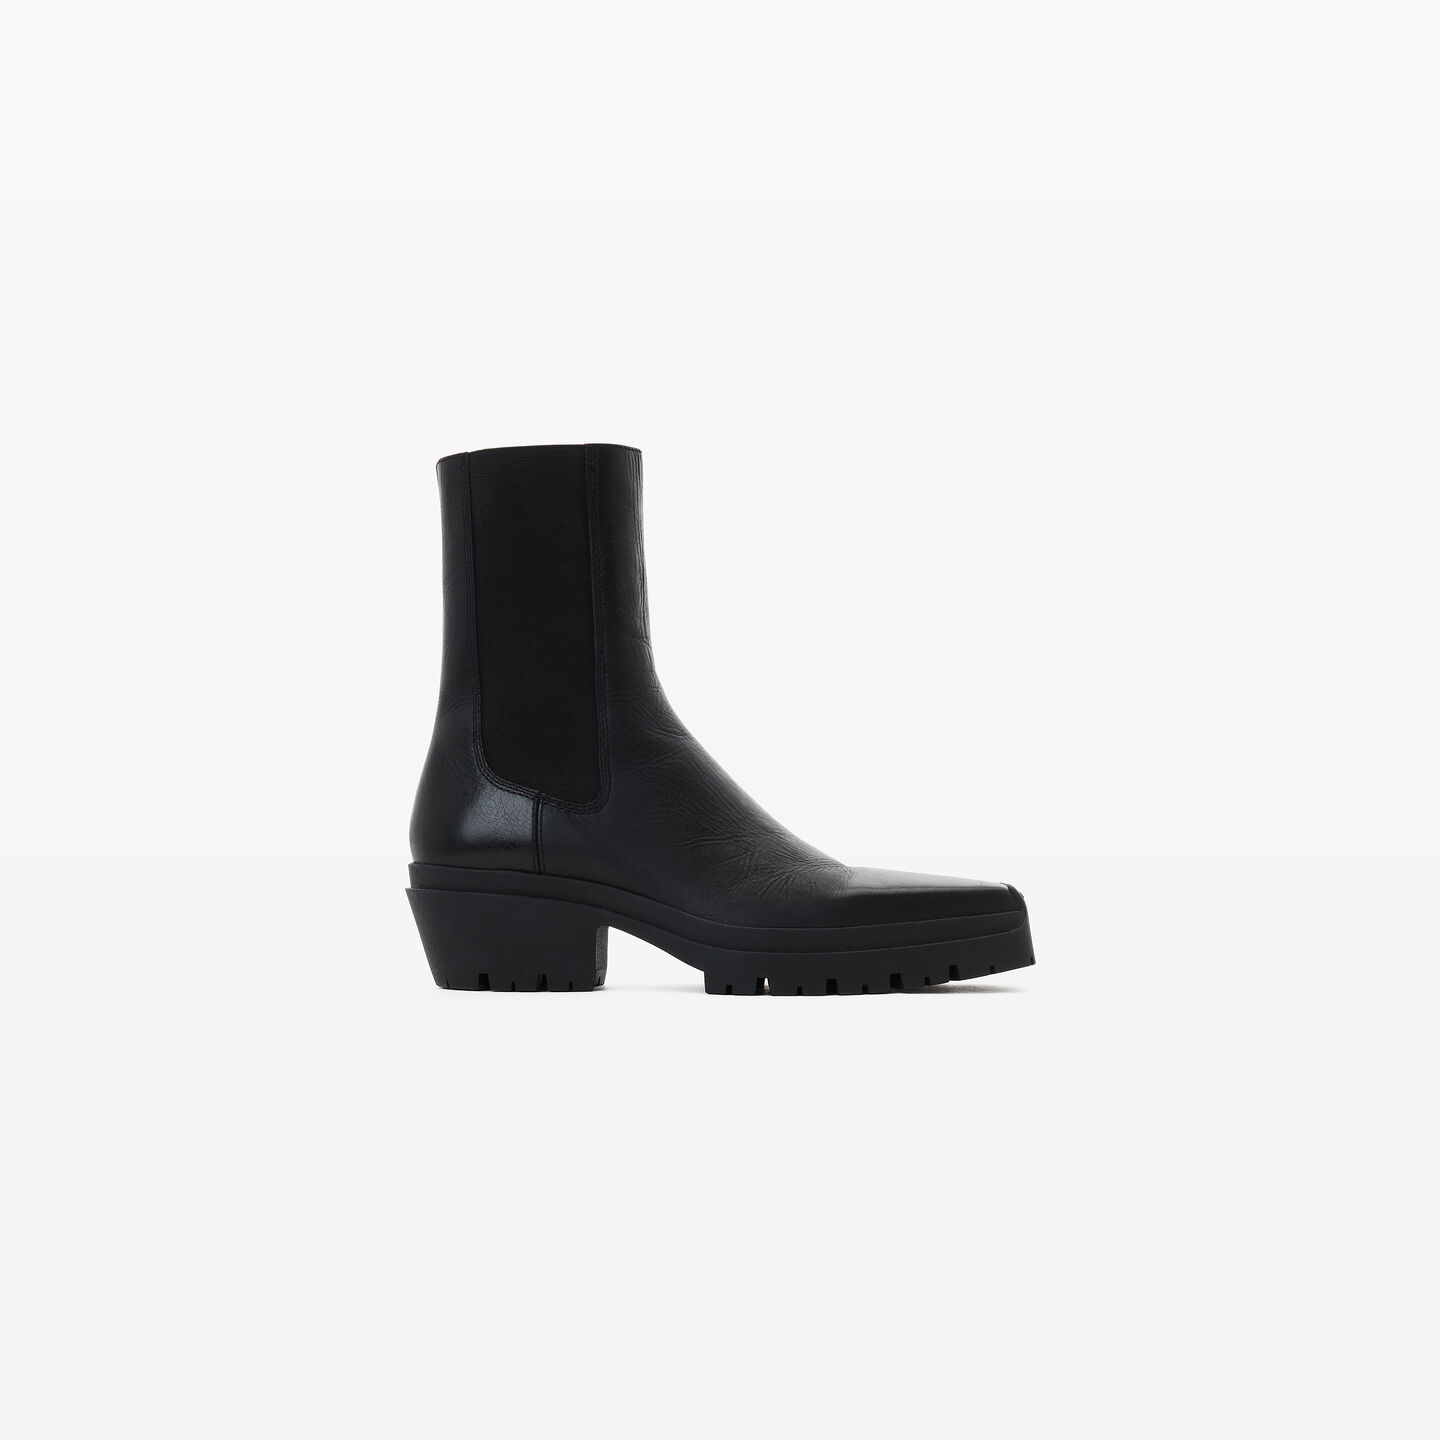 Alexander Wang Terrain Crackle Patent Leather Moto Boot In Black